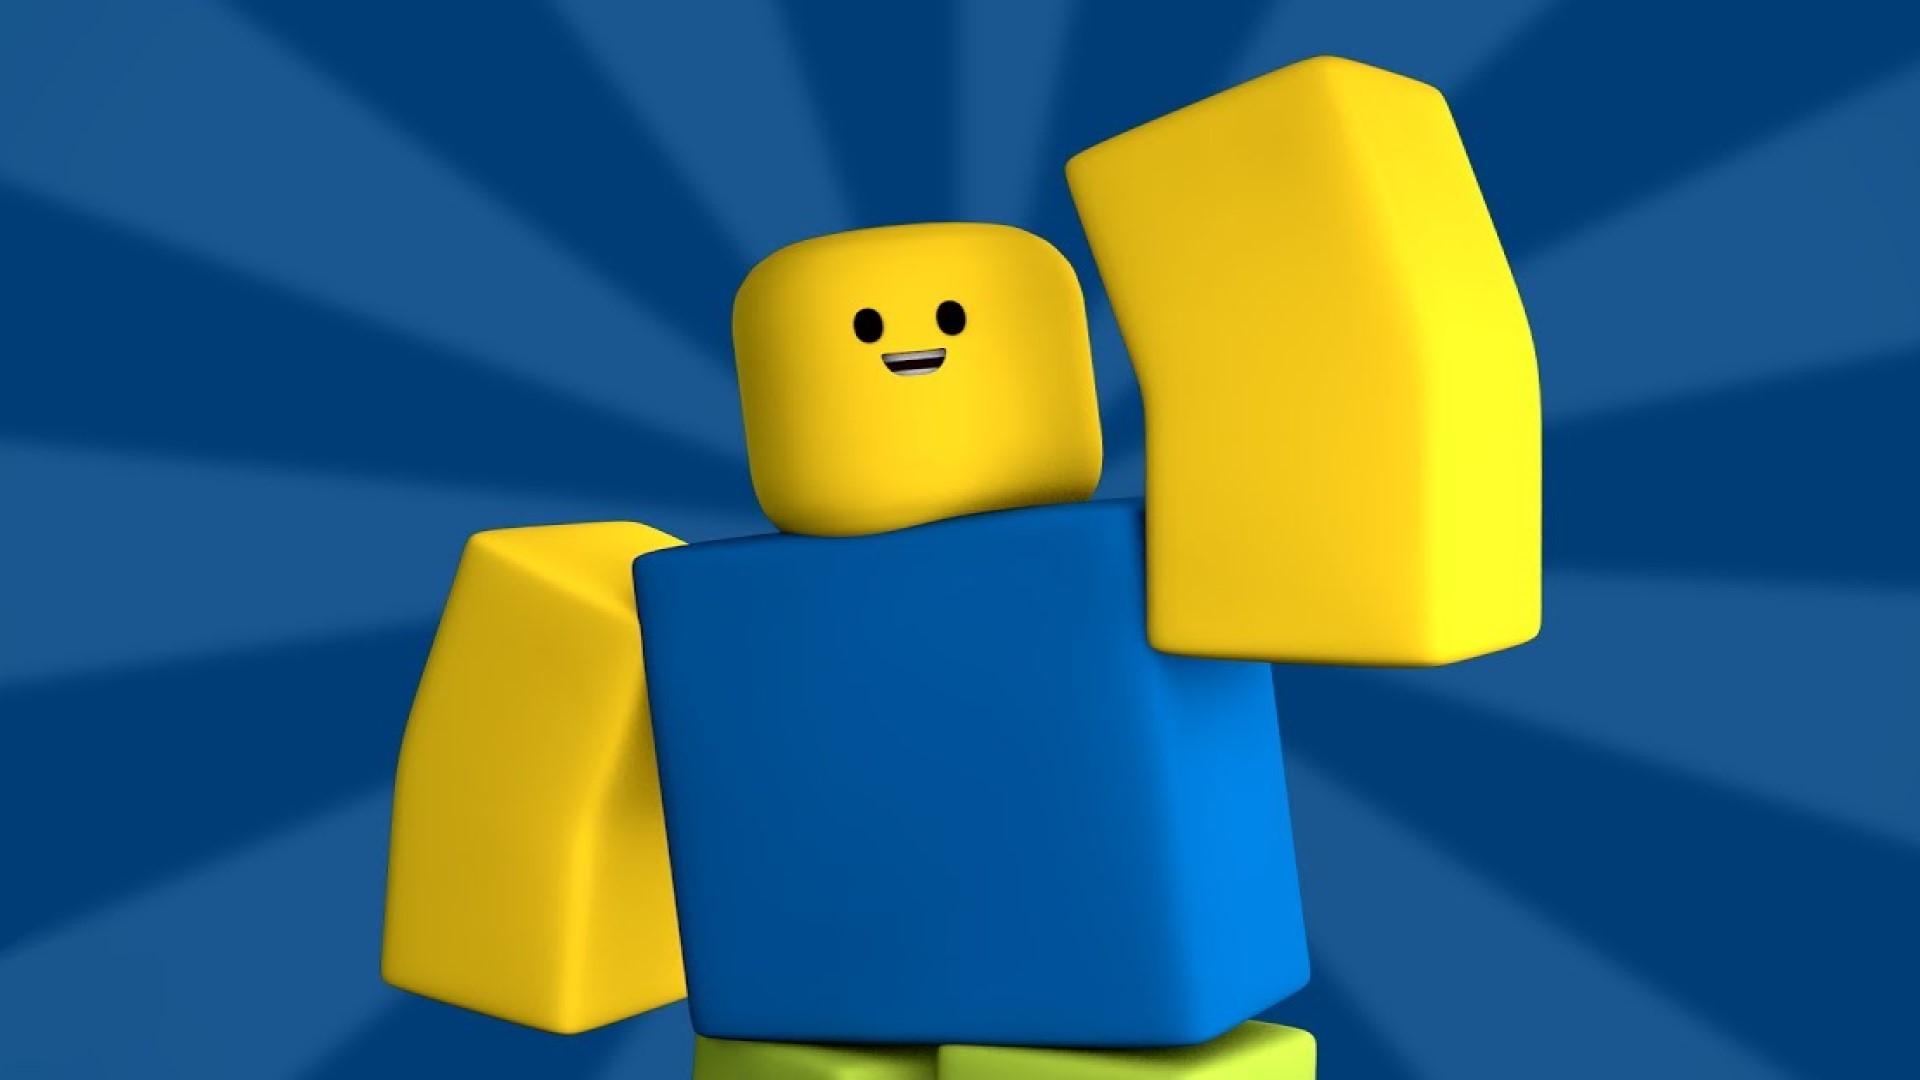 Roblox Noob What Does Noob Mean In Roblox Pocket Tactics - noob outfits for free in roblox